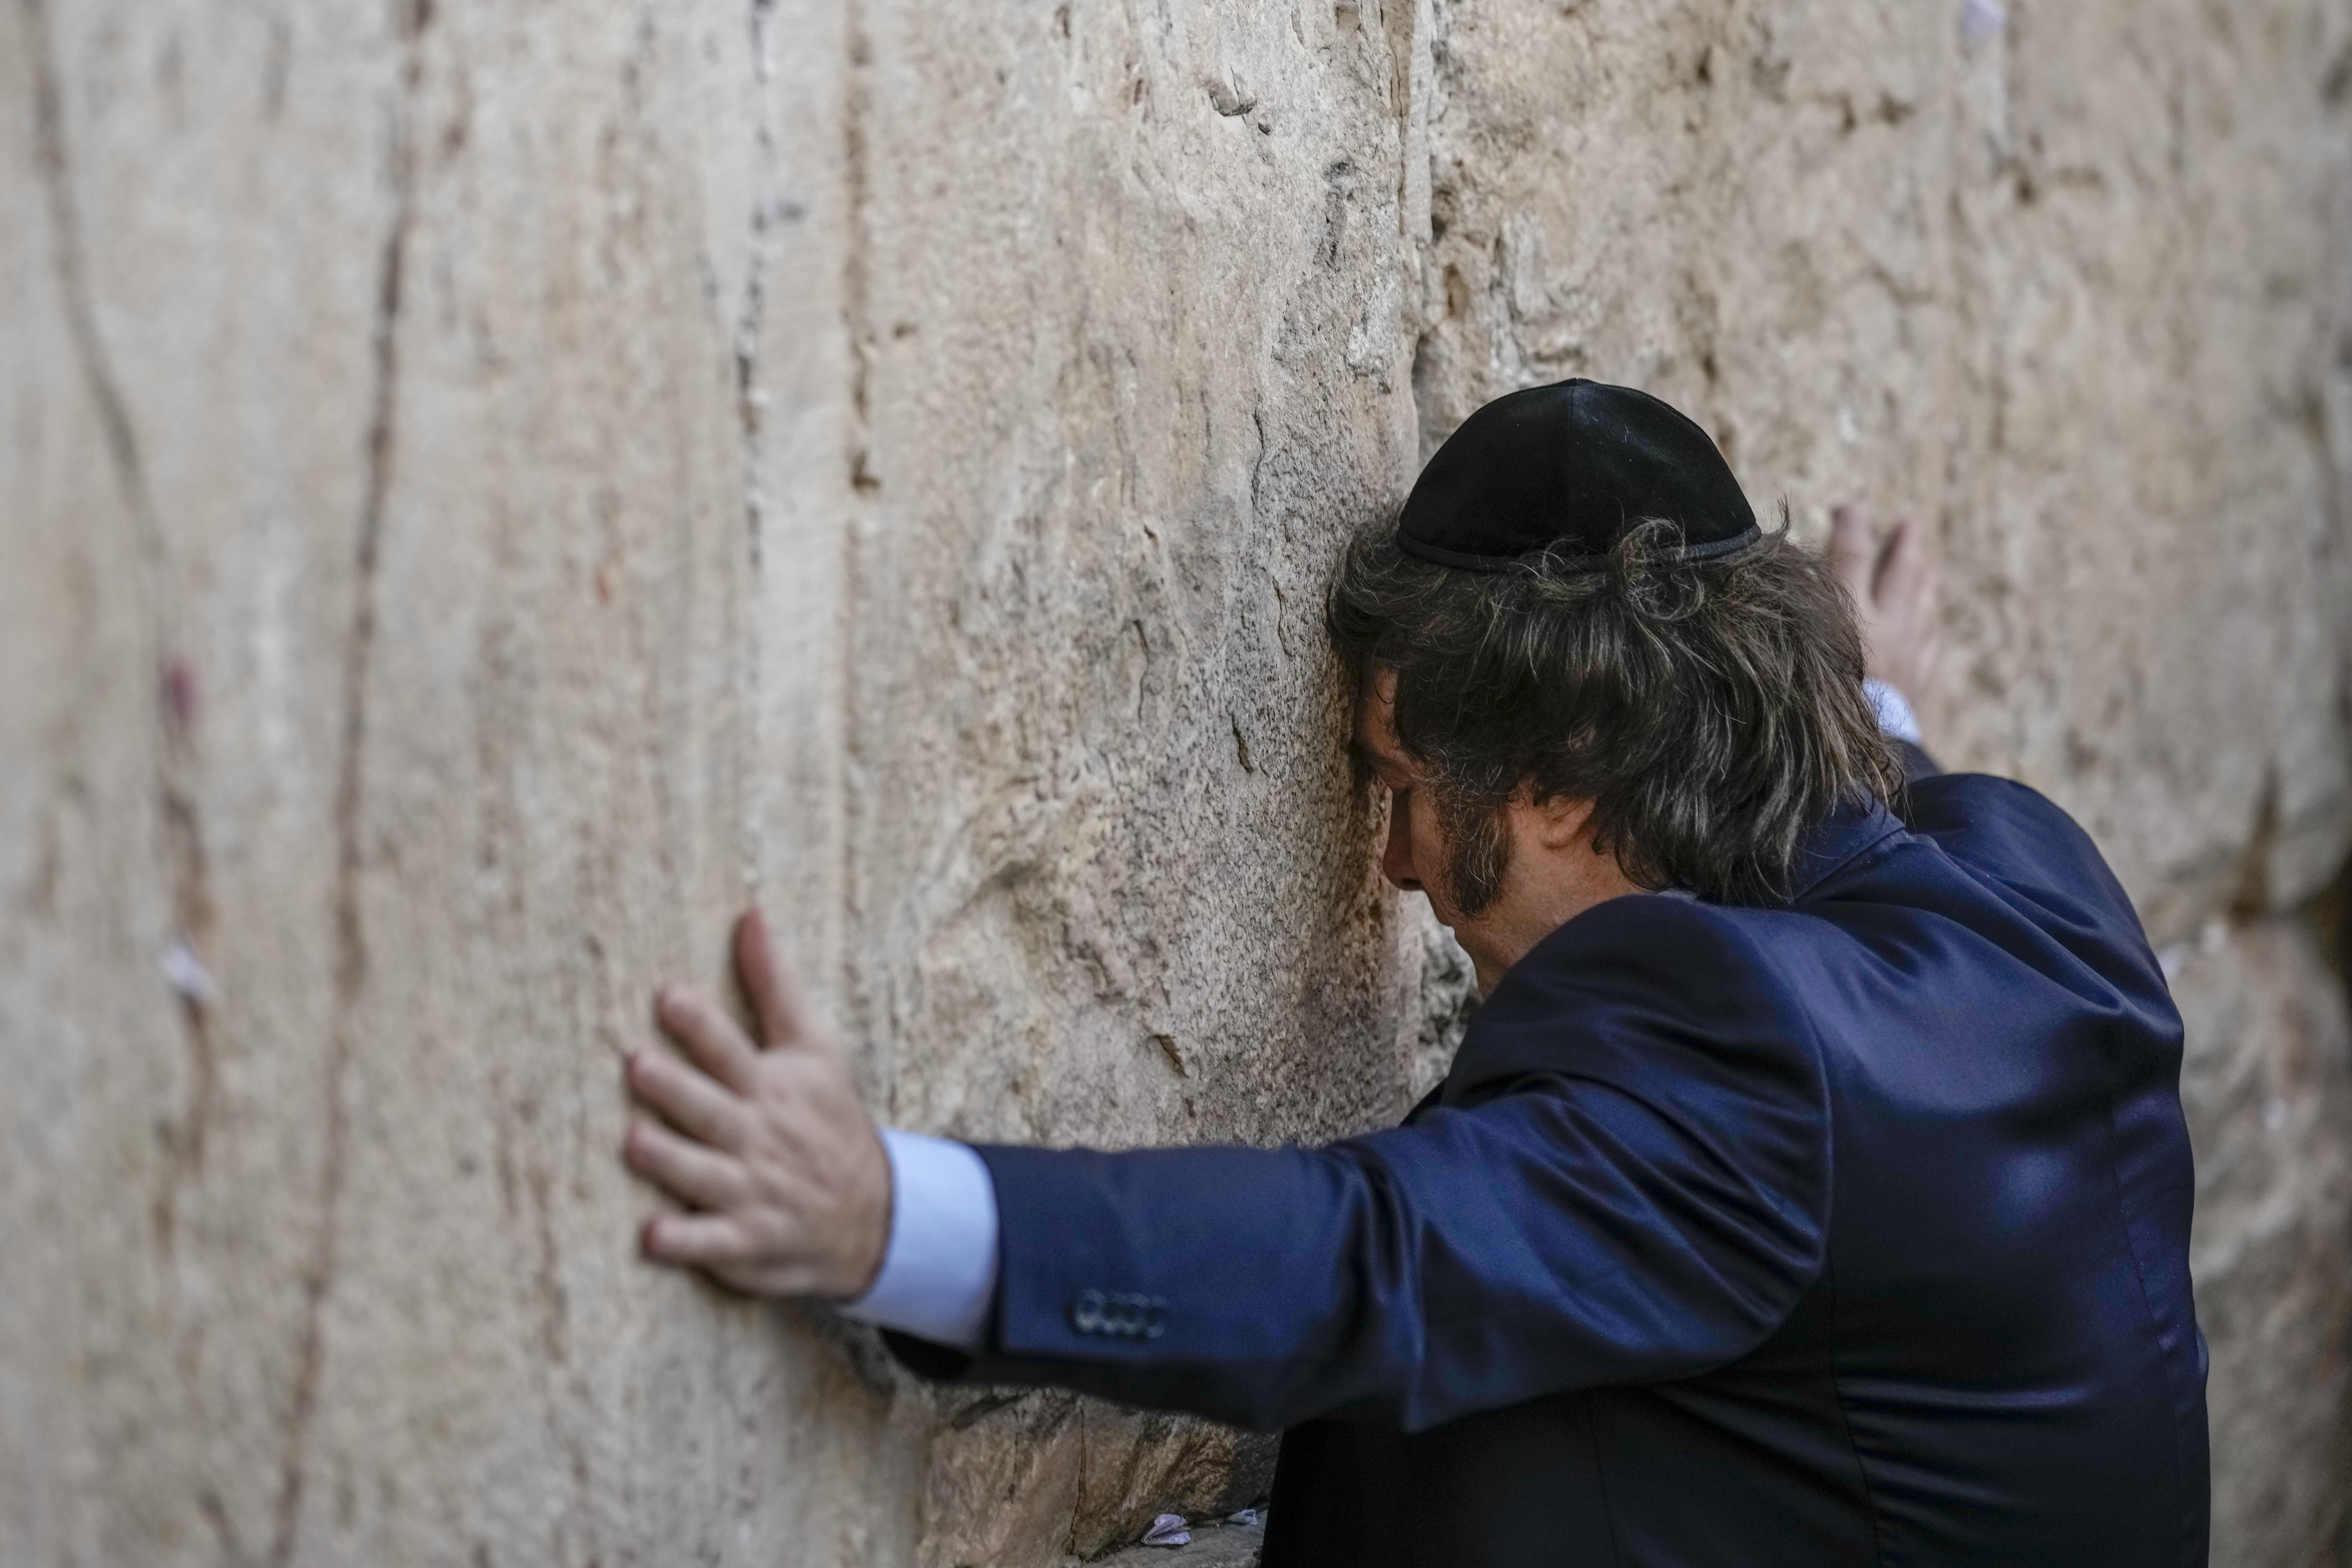 President Milei's surprising devotion to Judaism and Israel provokes tension in Argentina and beyond